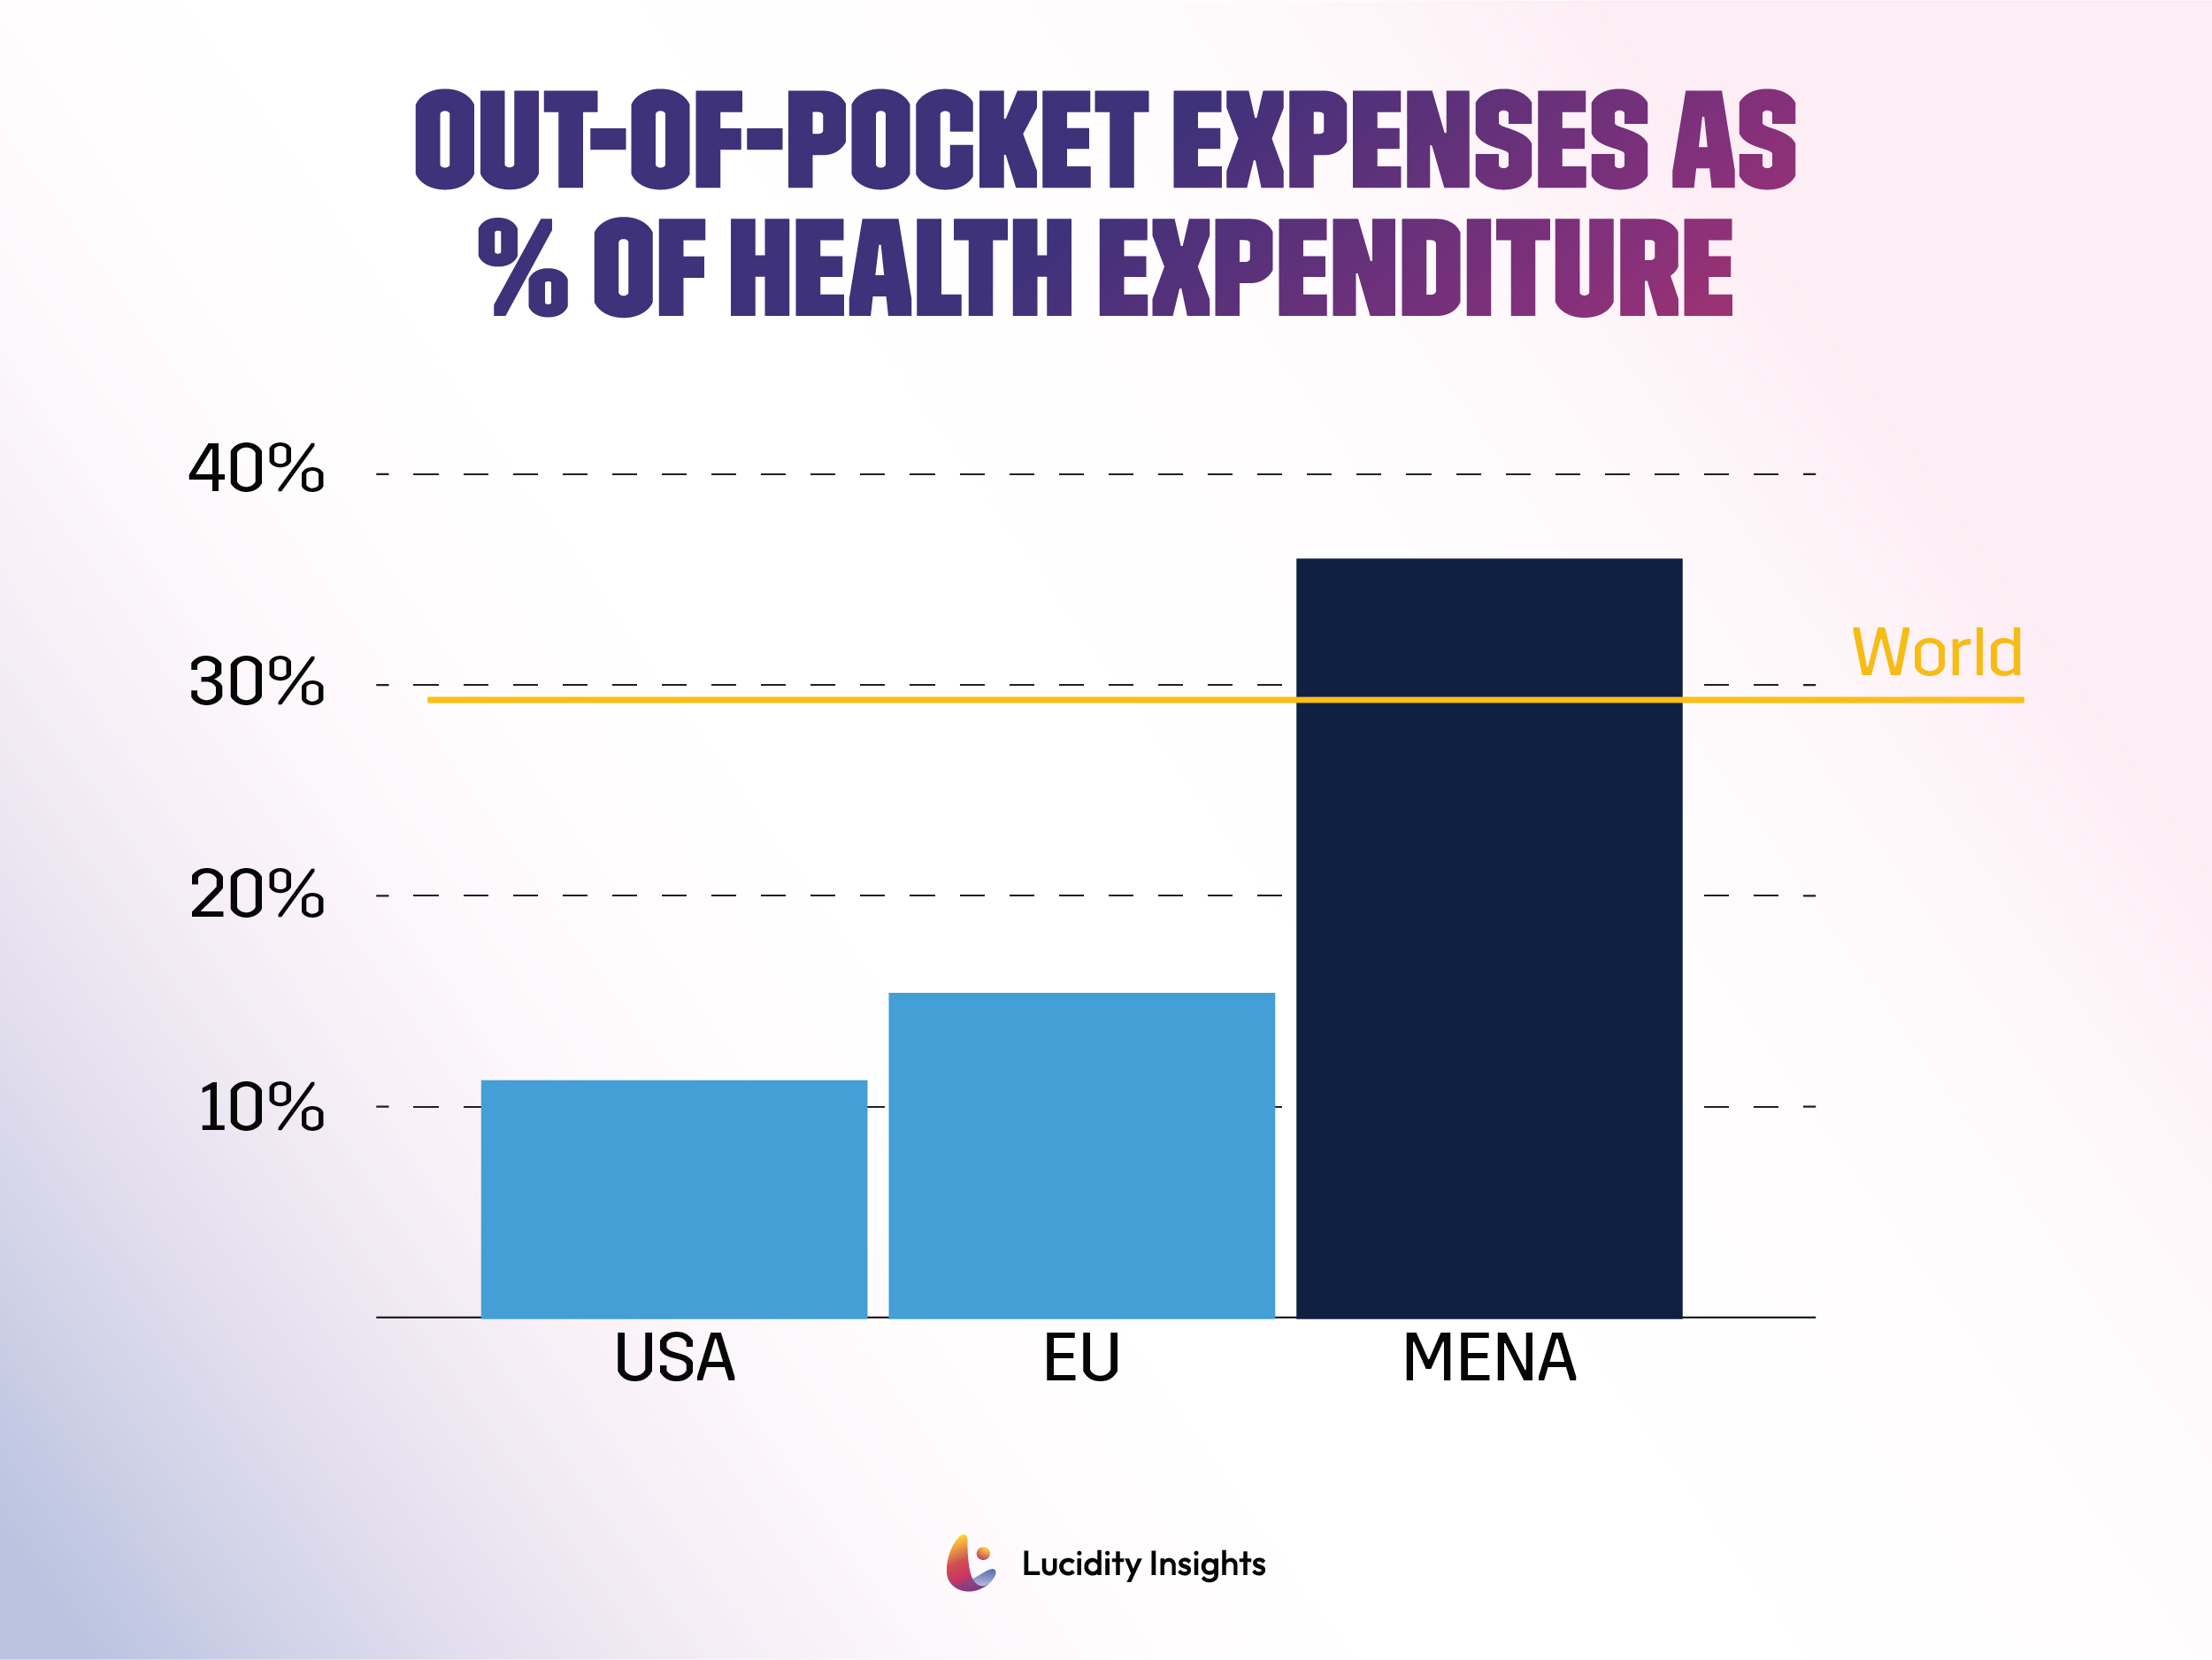 MENA Out-of-Pocket Expenses As % Of Health Expenditure